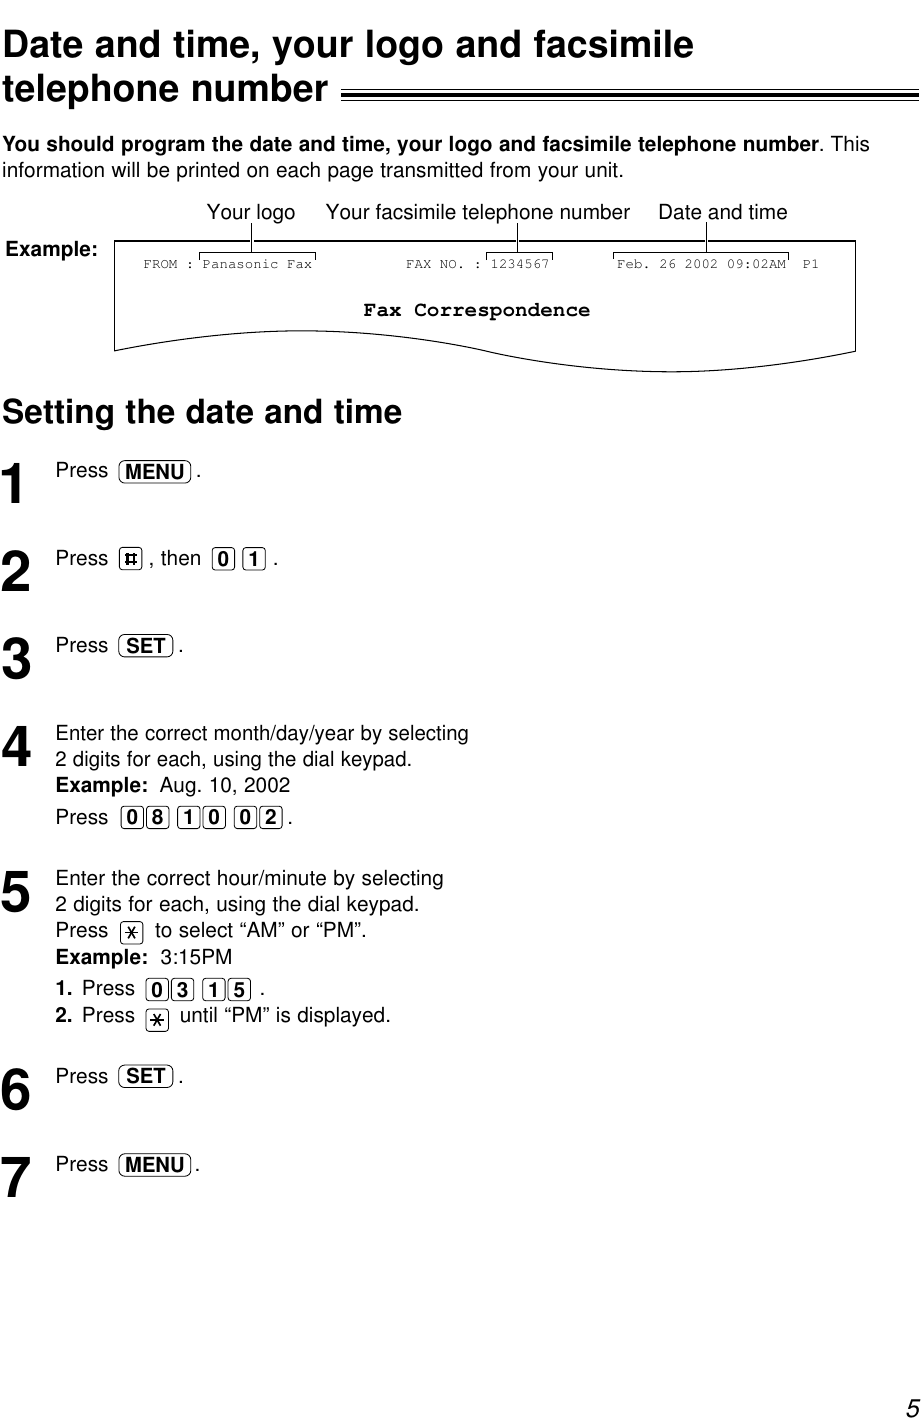 5Date and time, your logo and facsimiletelephone number!You should program the date and time, your logo and facsimile telephone number. Thisinformation will be printed on each page transmitted from your unit.Fax CorrespondenceYour logo Your facsimile telephone number Date and timeFROM : Panasonic FaxExample: FAX NO. : 1234567 Feb. 26 2002 09:02AM  P1Setting the date and time1Press .2Press  , then .3Press  .4Enter the correct month/day/year by selecting2 digits for each, using the dial keypad.Example: Aug. 10, 2002Press  .5Enter the correct hour/minute by selecting 2 digits for each, using the dial keypad.Press  to select “AM” or “PM”.Example: 3:15PM1. Press  .2. Press  until “PM” is displayed.6Press  .7Press .MENUSET1 50 300 1 28 0SET0 1MENU